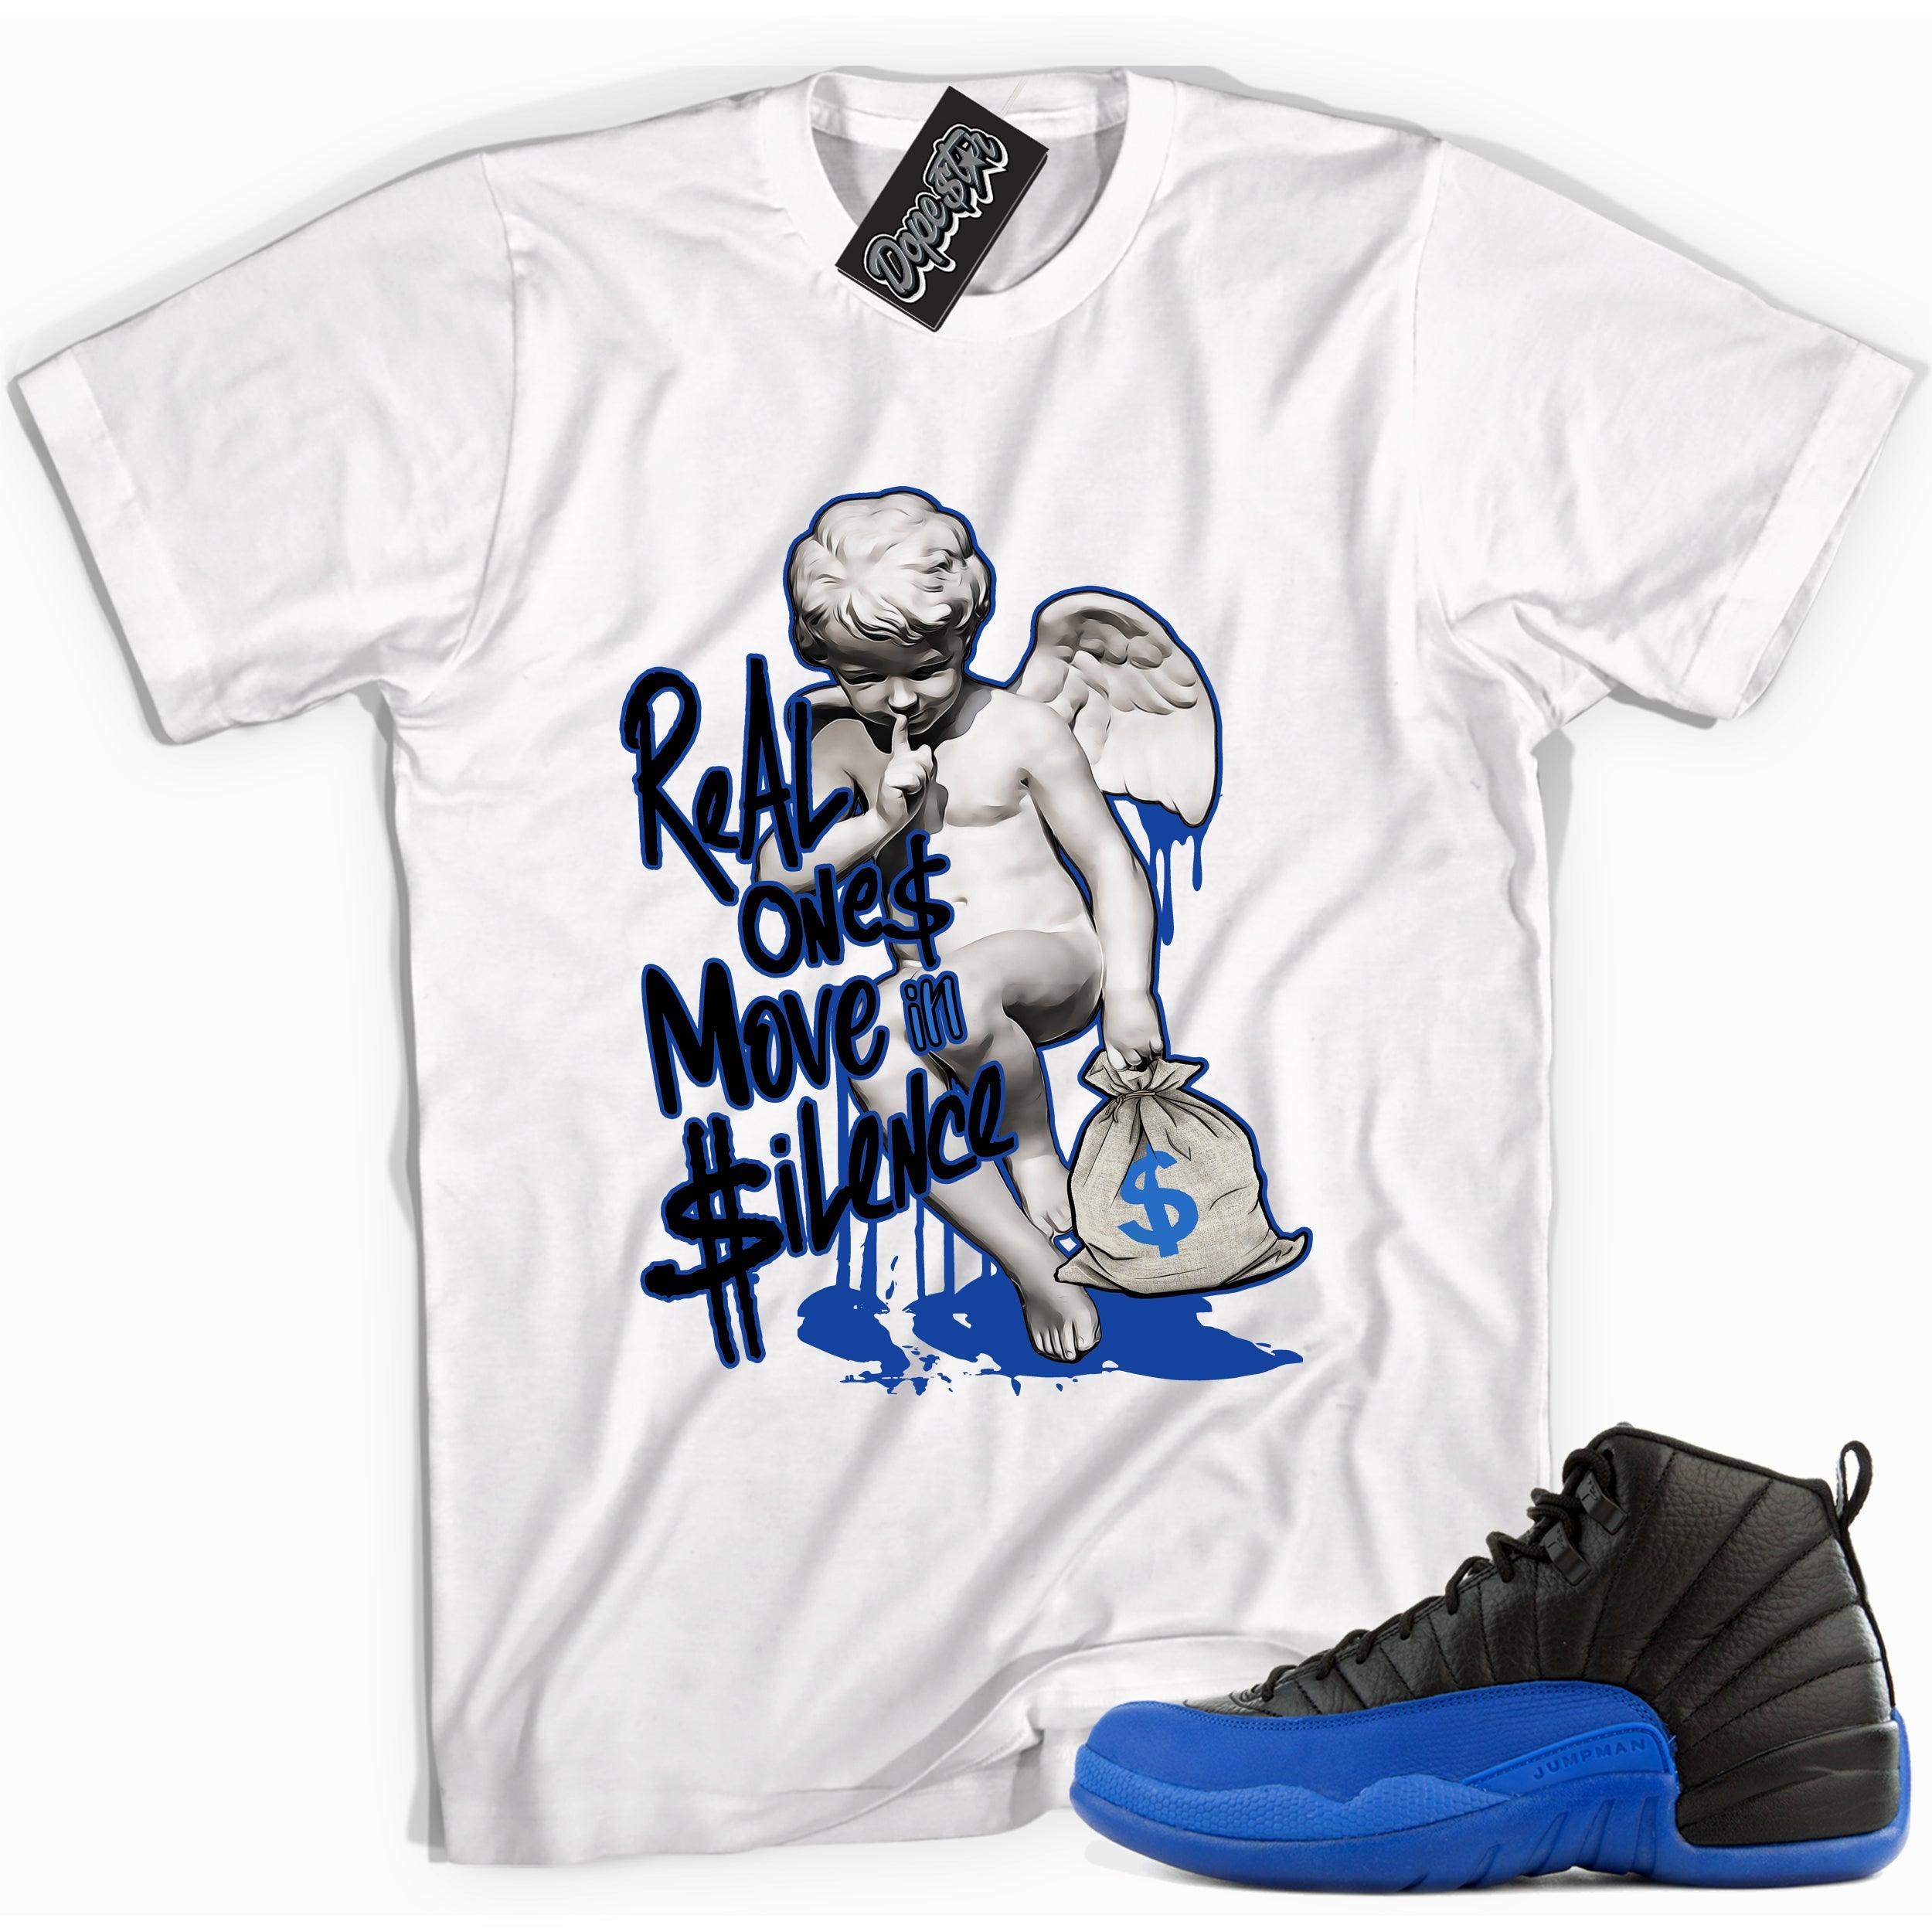 Cool white graphic tee with 'real ones move in silence' print, that perfectly matches Air Jordan 12 Retro Black Game Royal sneakers.